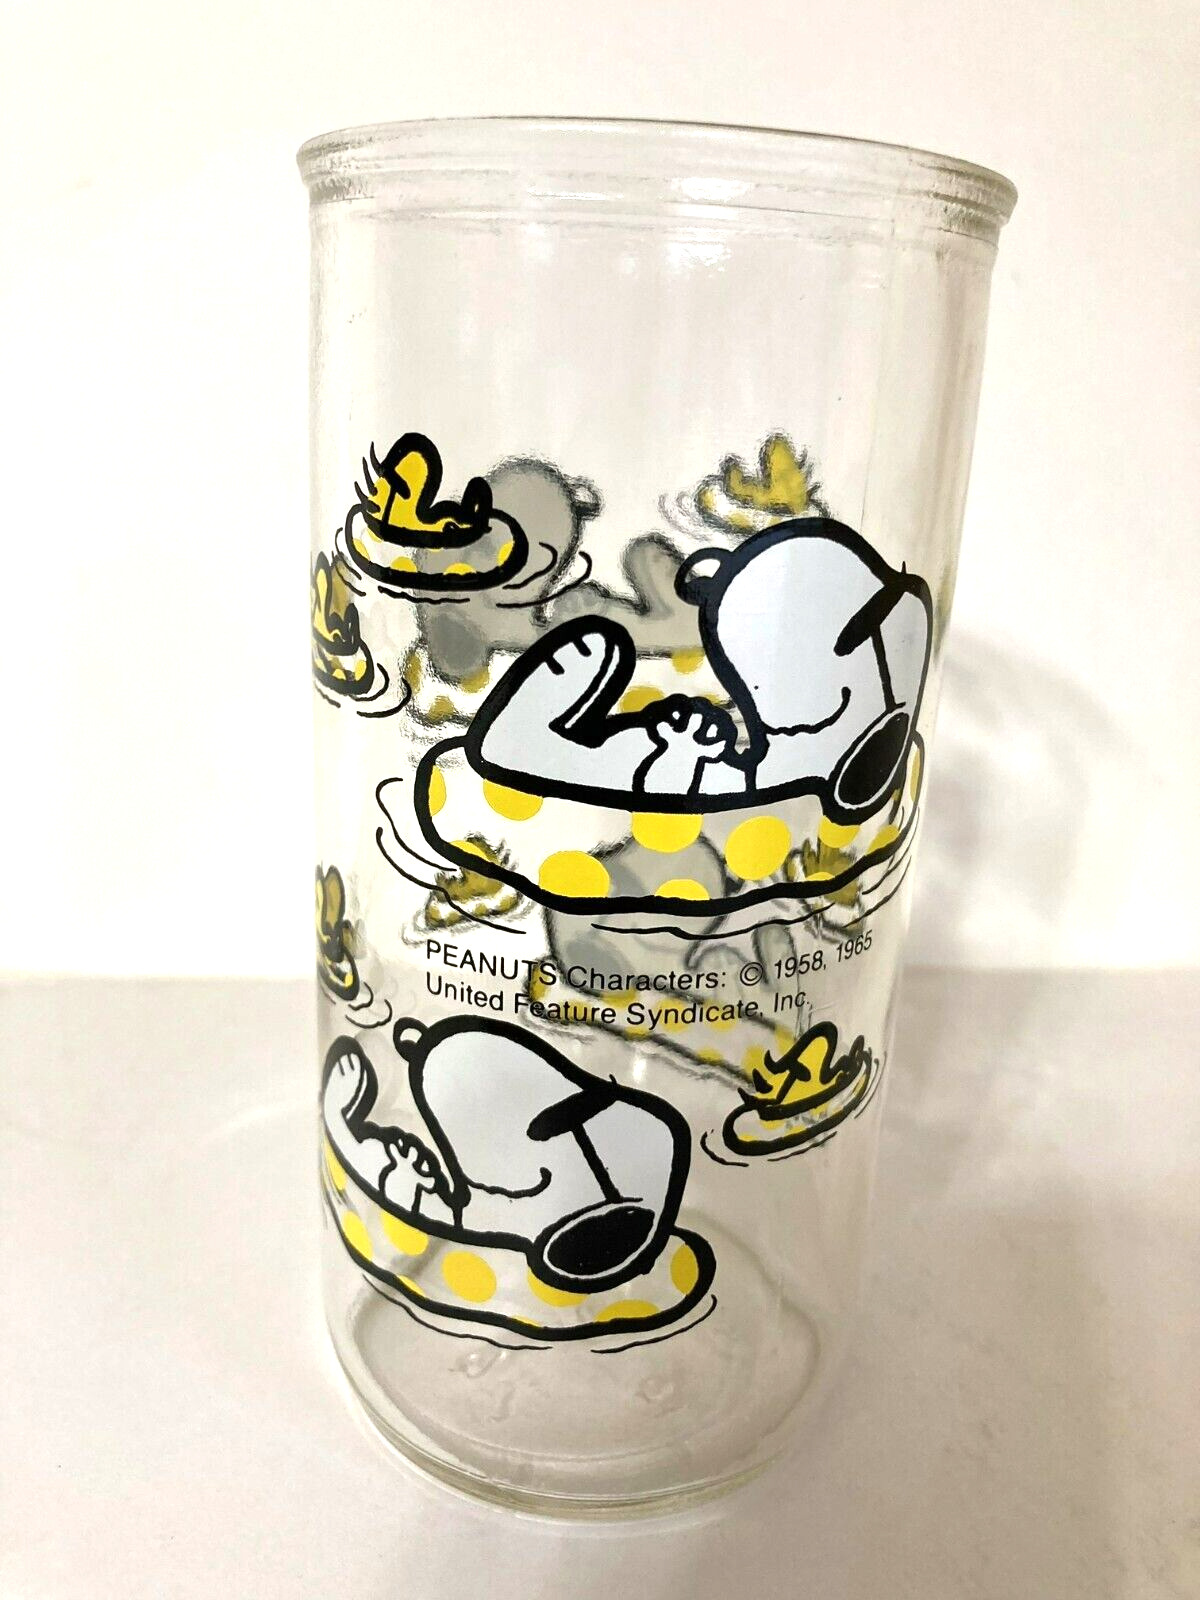 Vintage Peanuts Glass - Snoopy and Woodstock c 1958, 1965